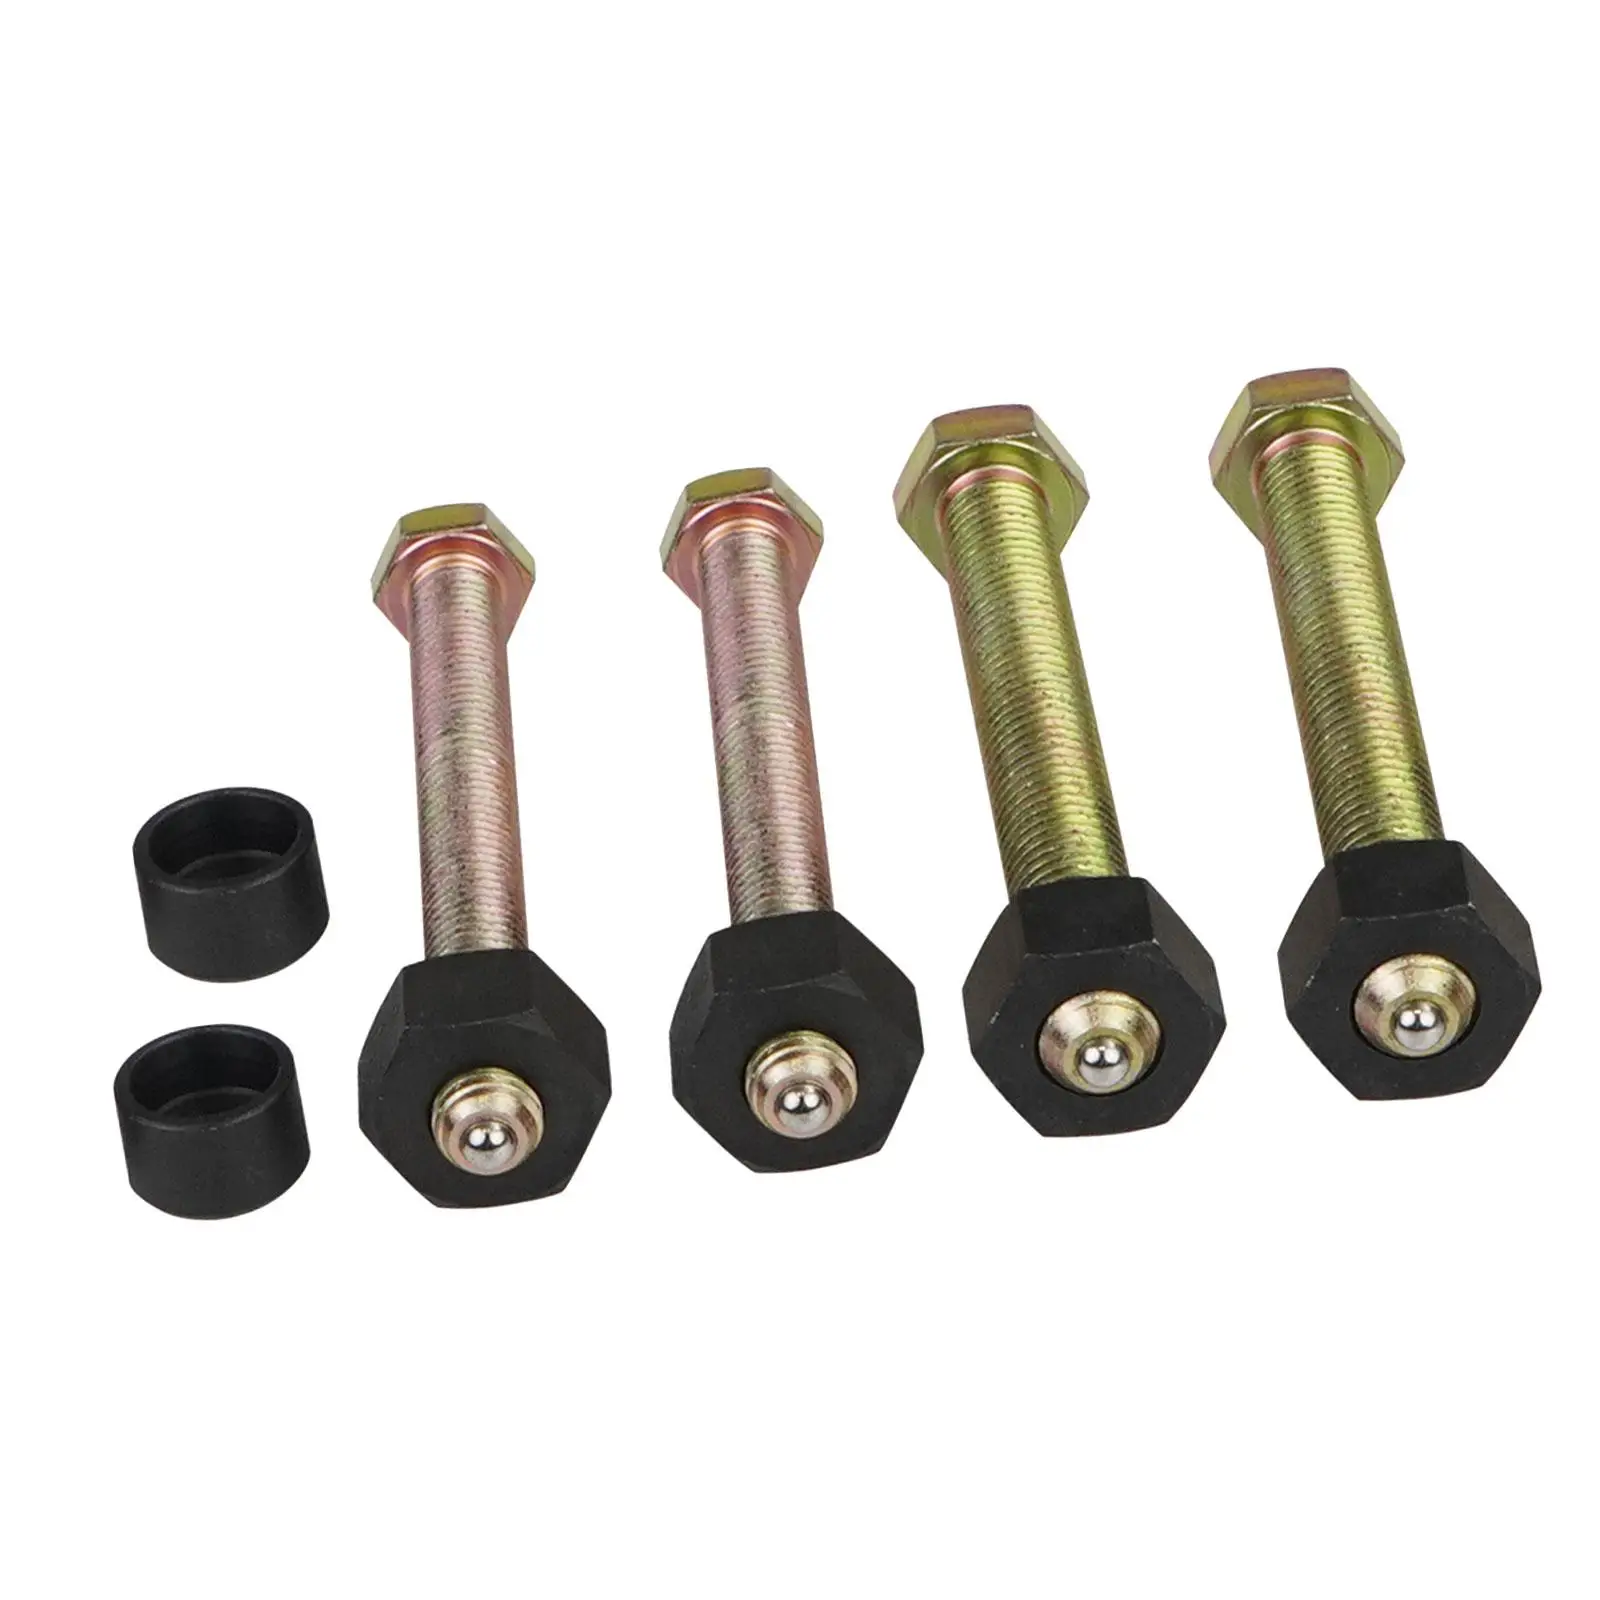 78834 Spare Parts Replaces M12 M14 Nut Impact Rated Hub Removal Bolt Set